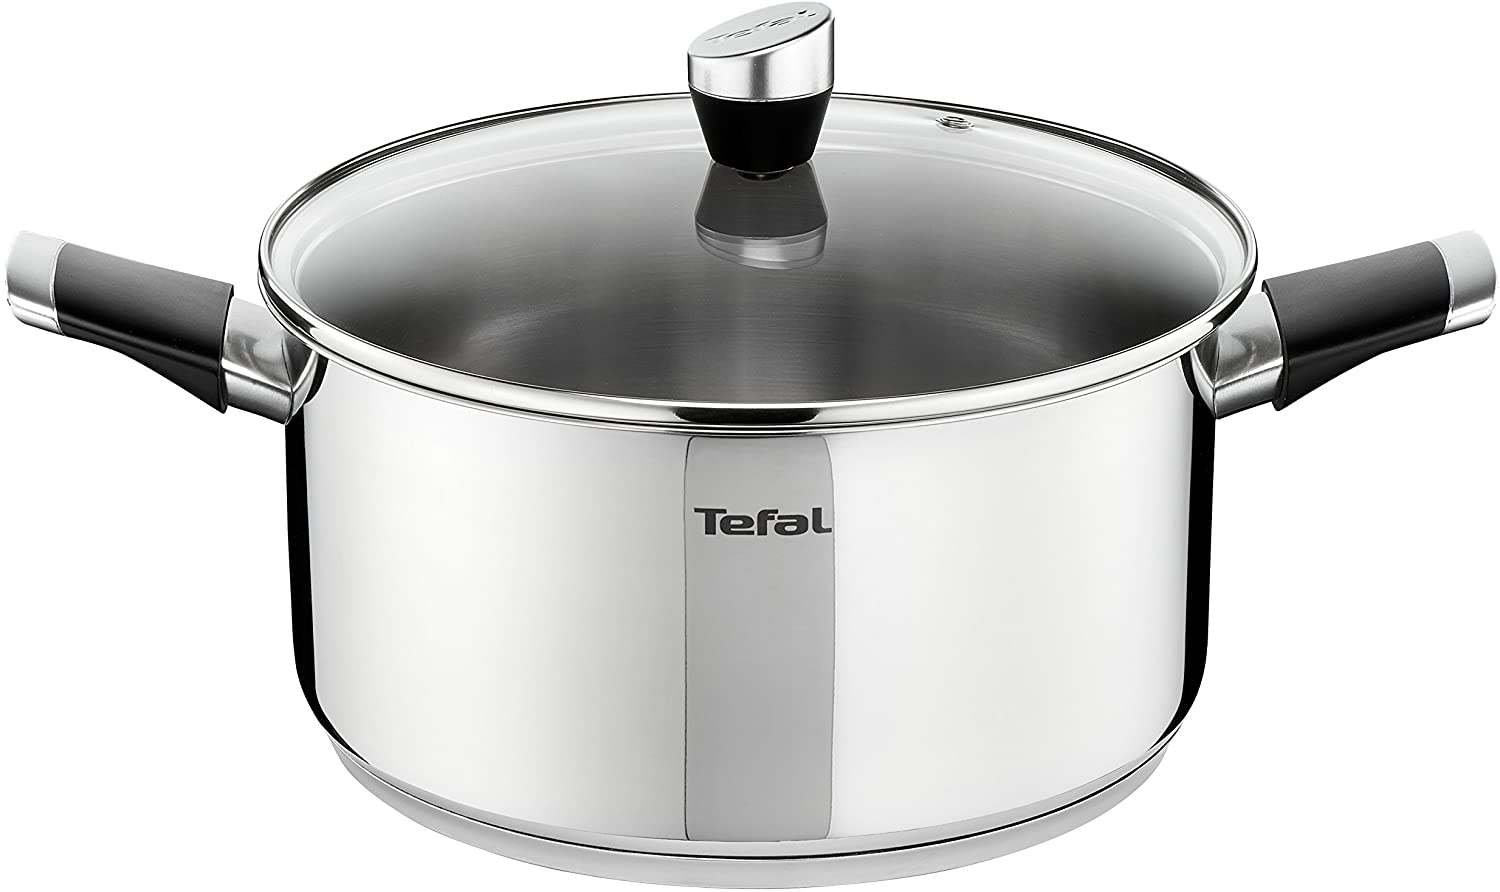 Tefal E8234614 Emotion Stainless Steel Cooking Pot 24 cm